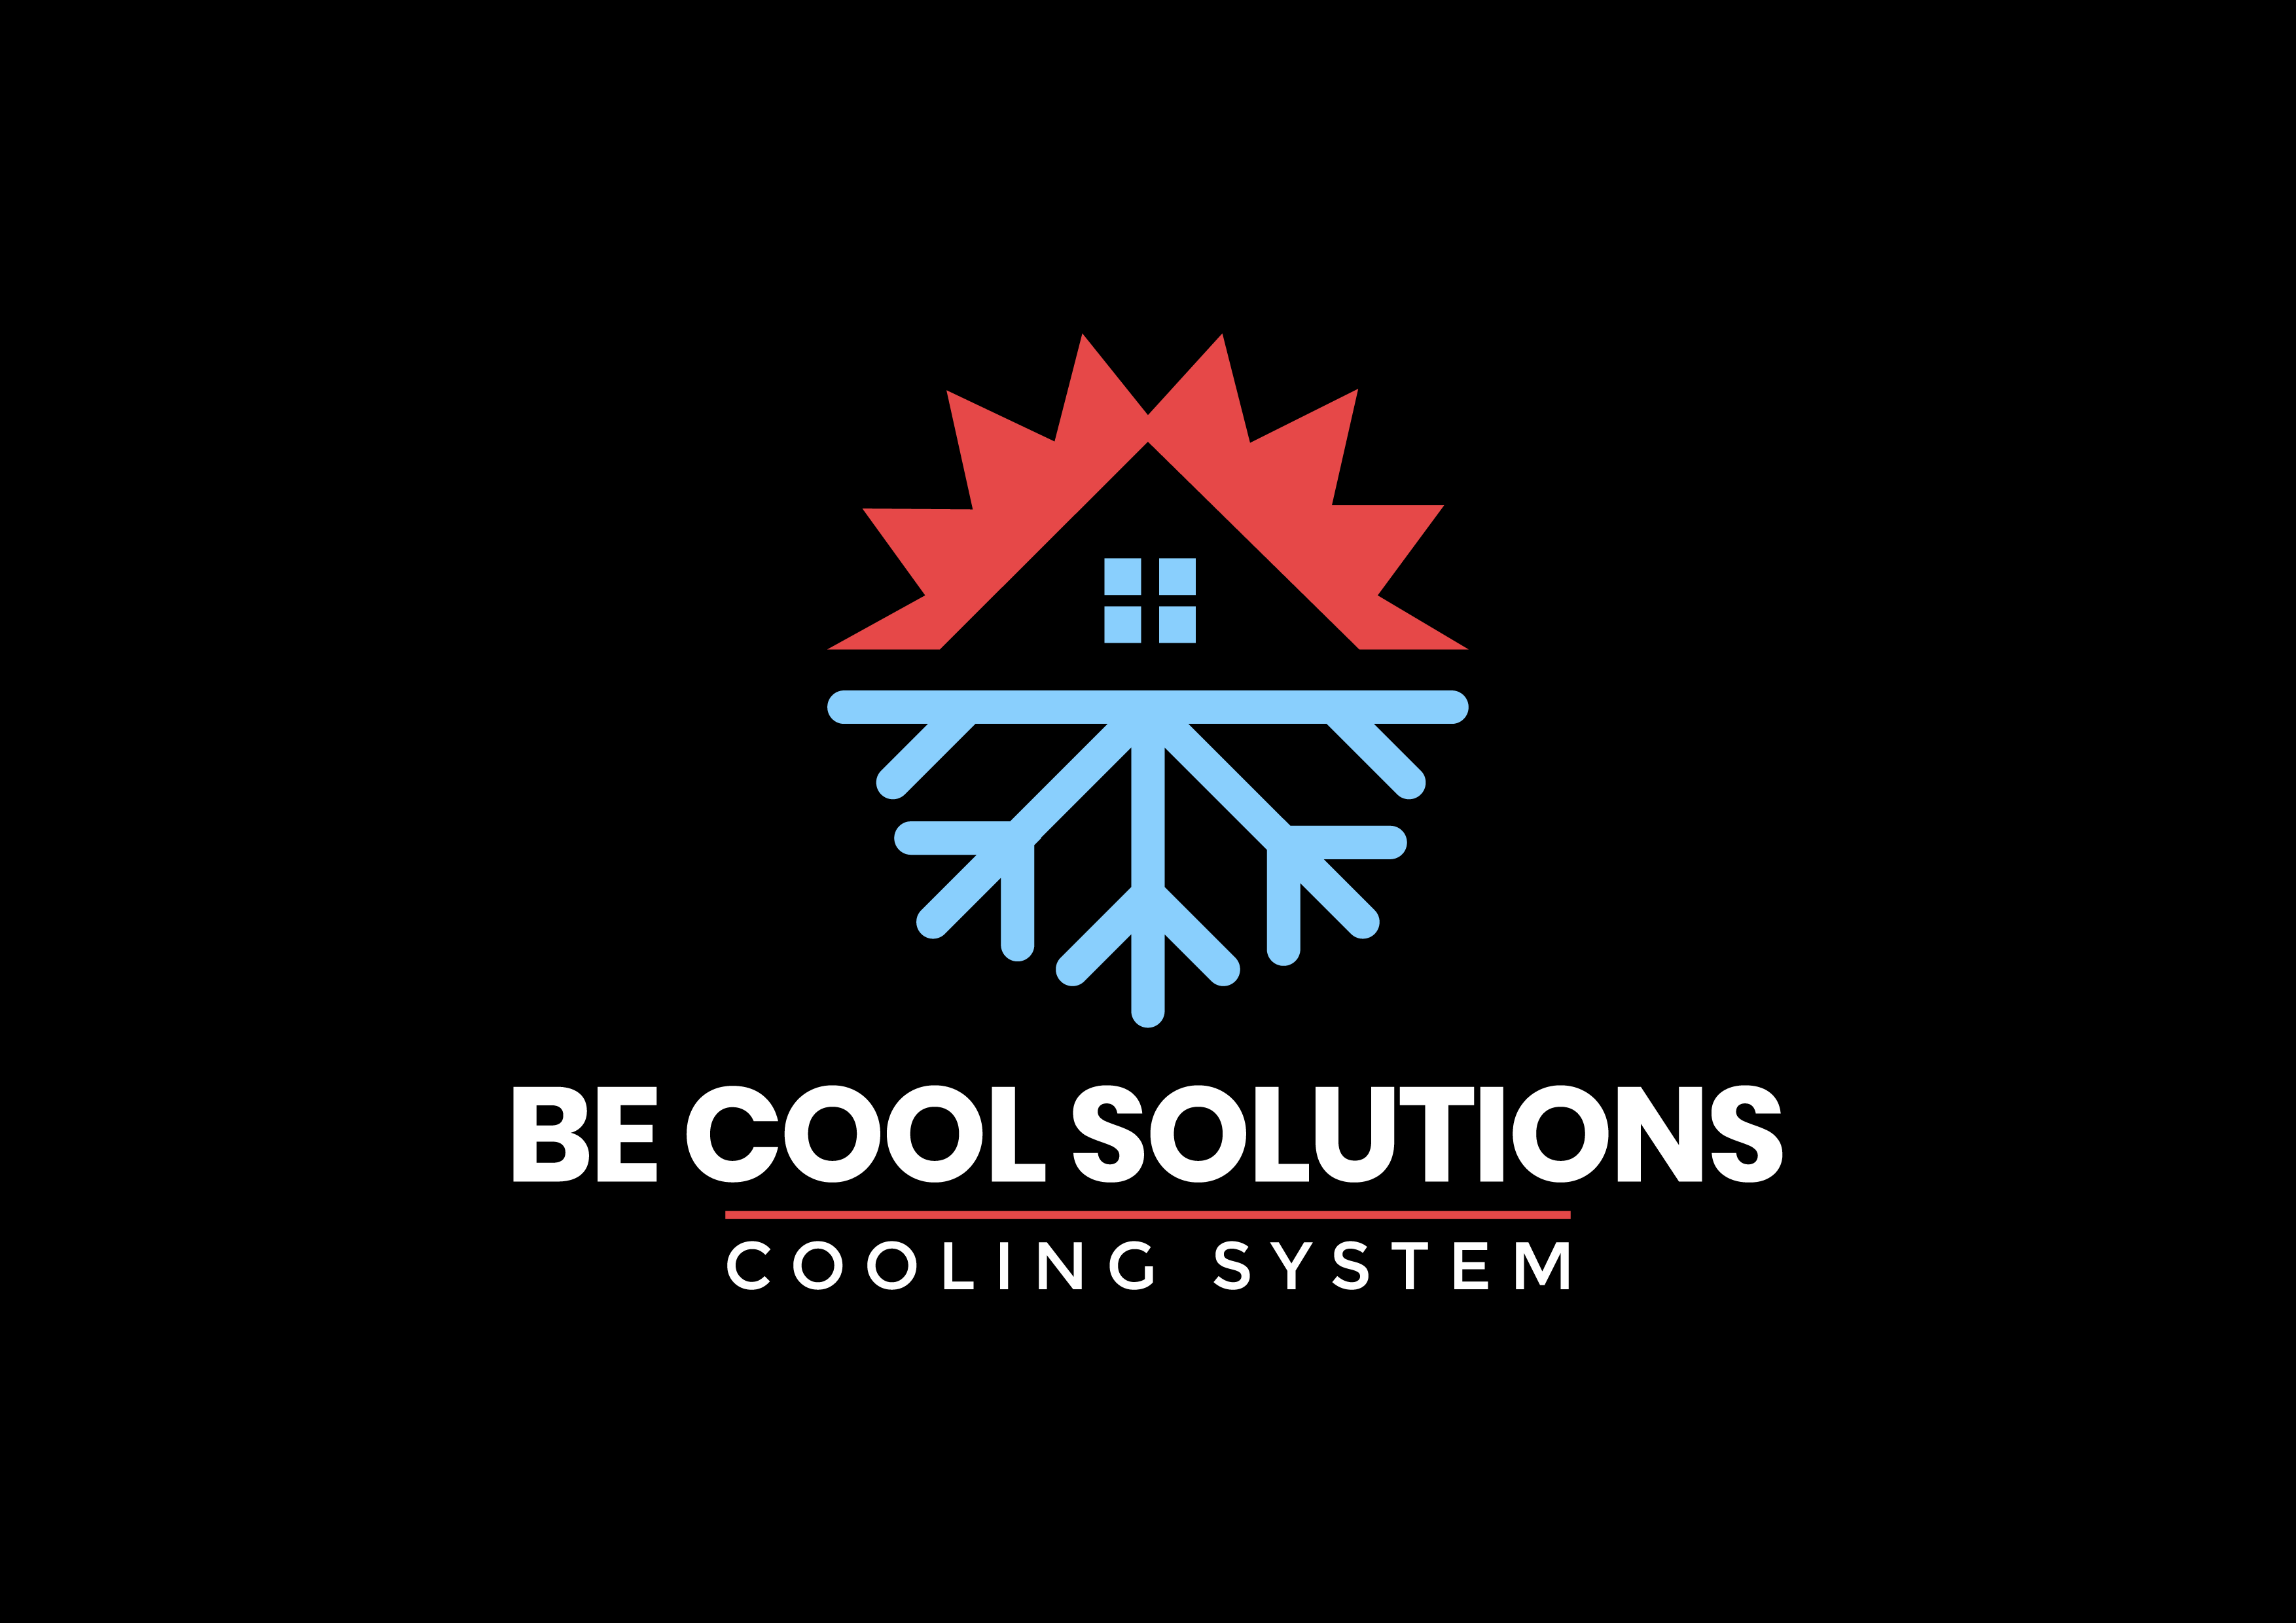 installateurs van airconditioning Sint-Lambrechts-Woluwe Be Cool Solutions